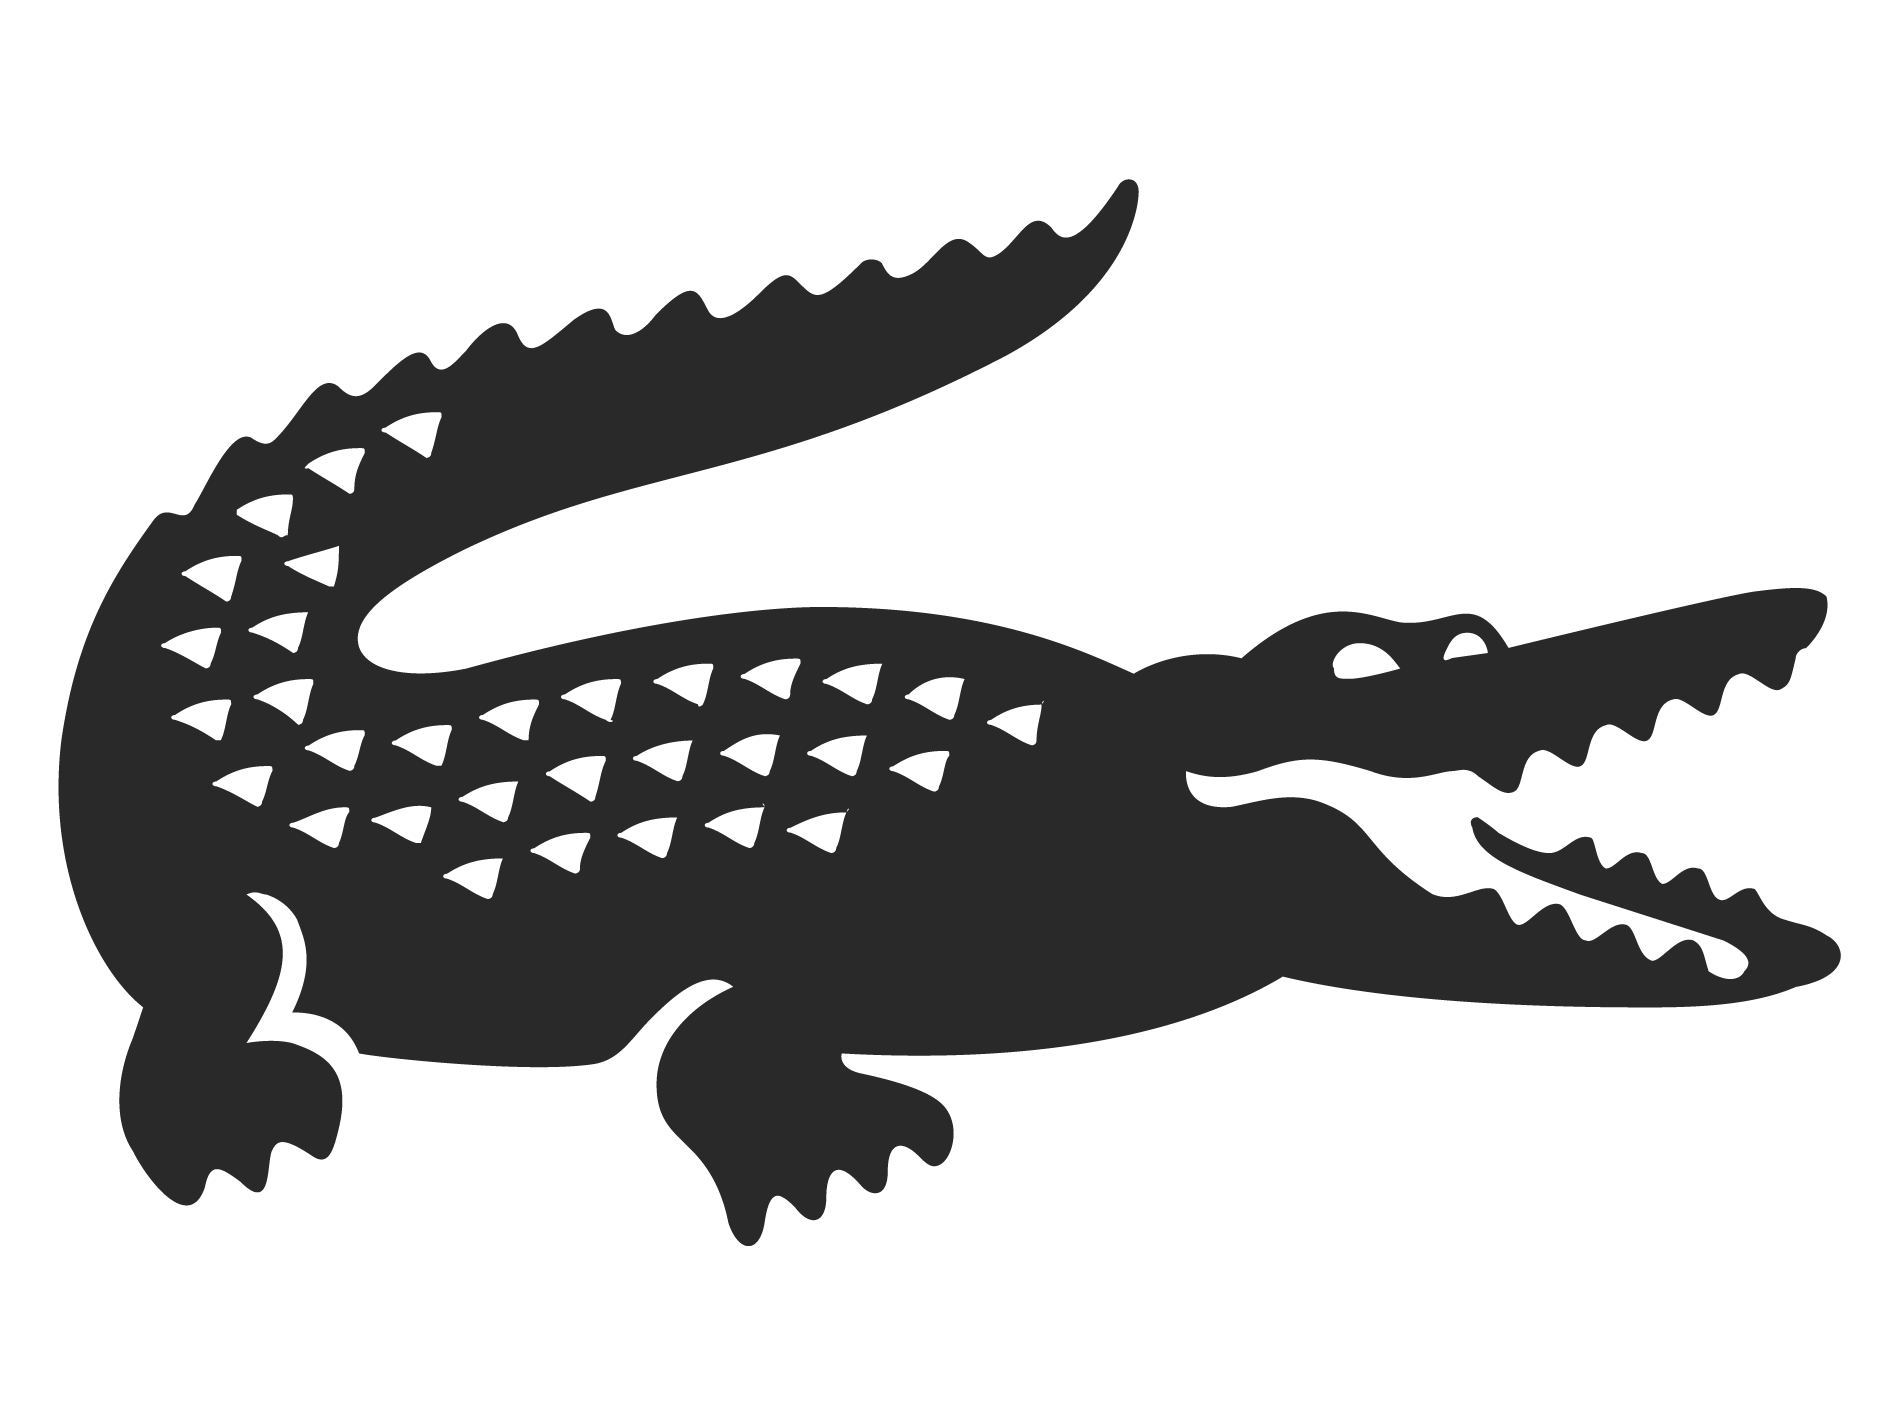 Download LACOSTE CROCODILE Logo PNG and Vector (PDF, SVG, Ai, EPS) Free